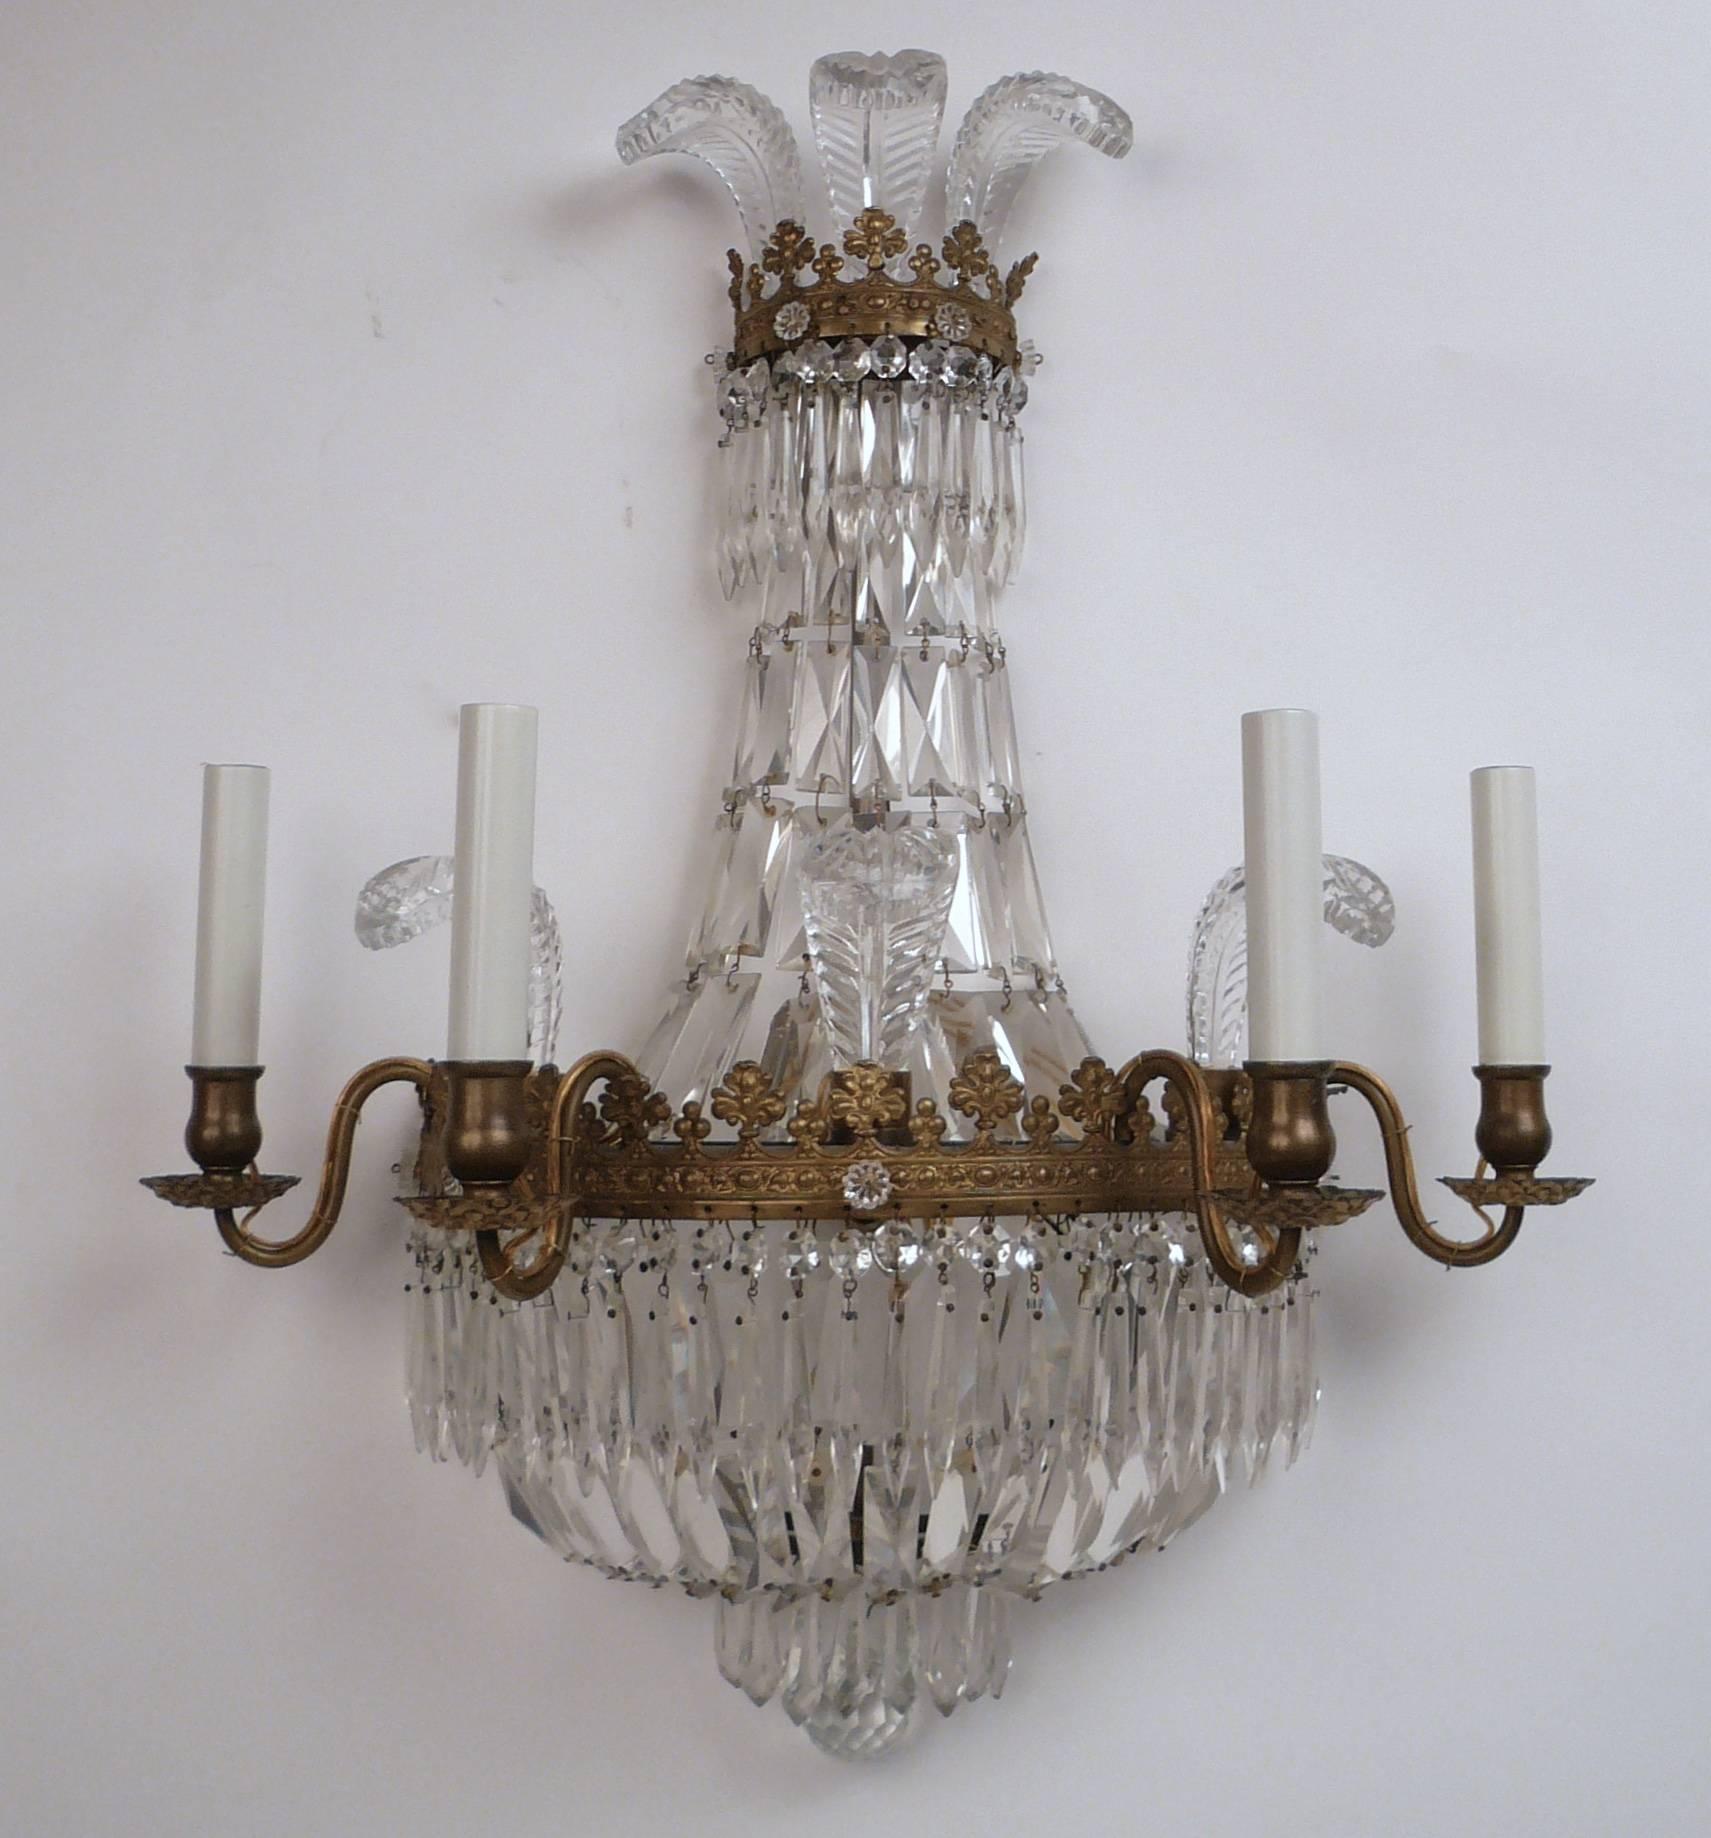 These Hollywood Regency style four light sconces of tent and bag form feature a cut crystal feather corona.
The brass repousse frame incorporates neoclassical motifs and is hung with faceted crystal drops.